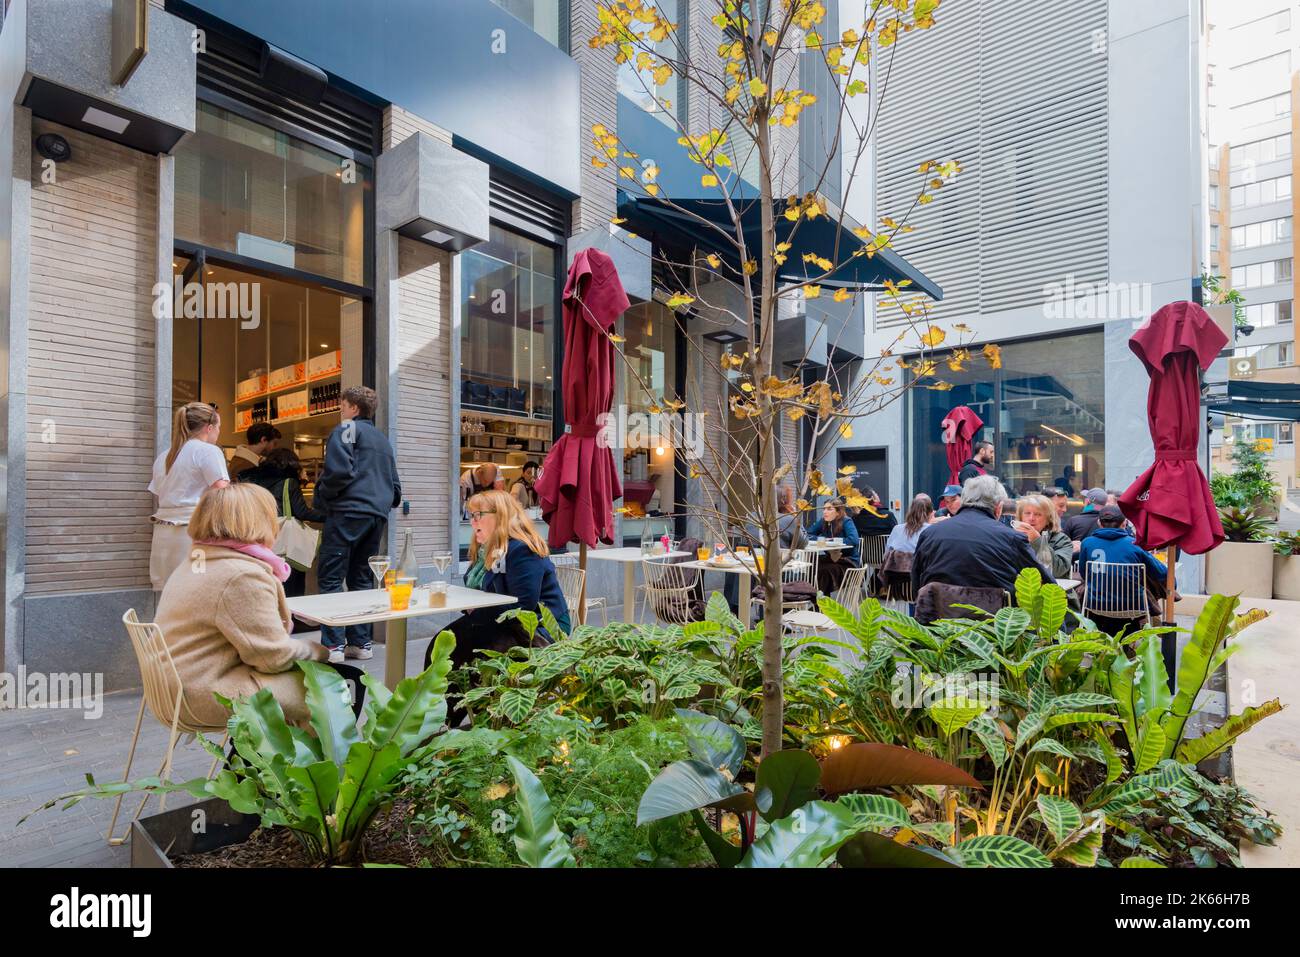 People sitting at outdoor tables at a café that forms part of the new Quay Quarter Laneways retail offering in Sydney, New South Wales, Australia Stock Photo